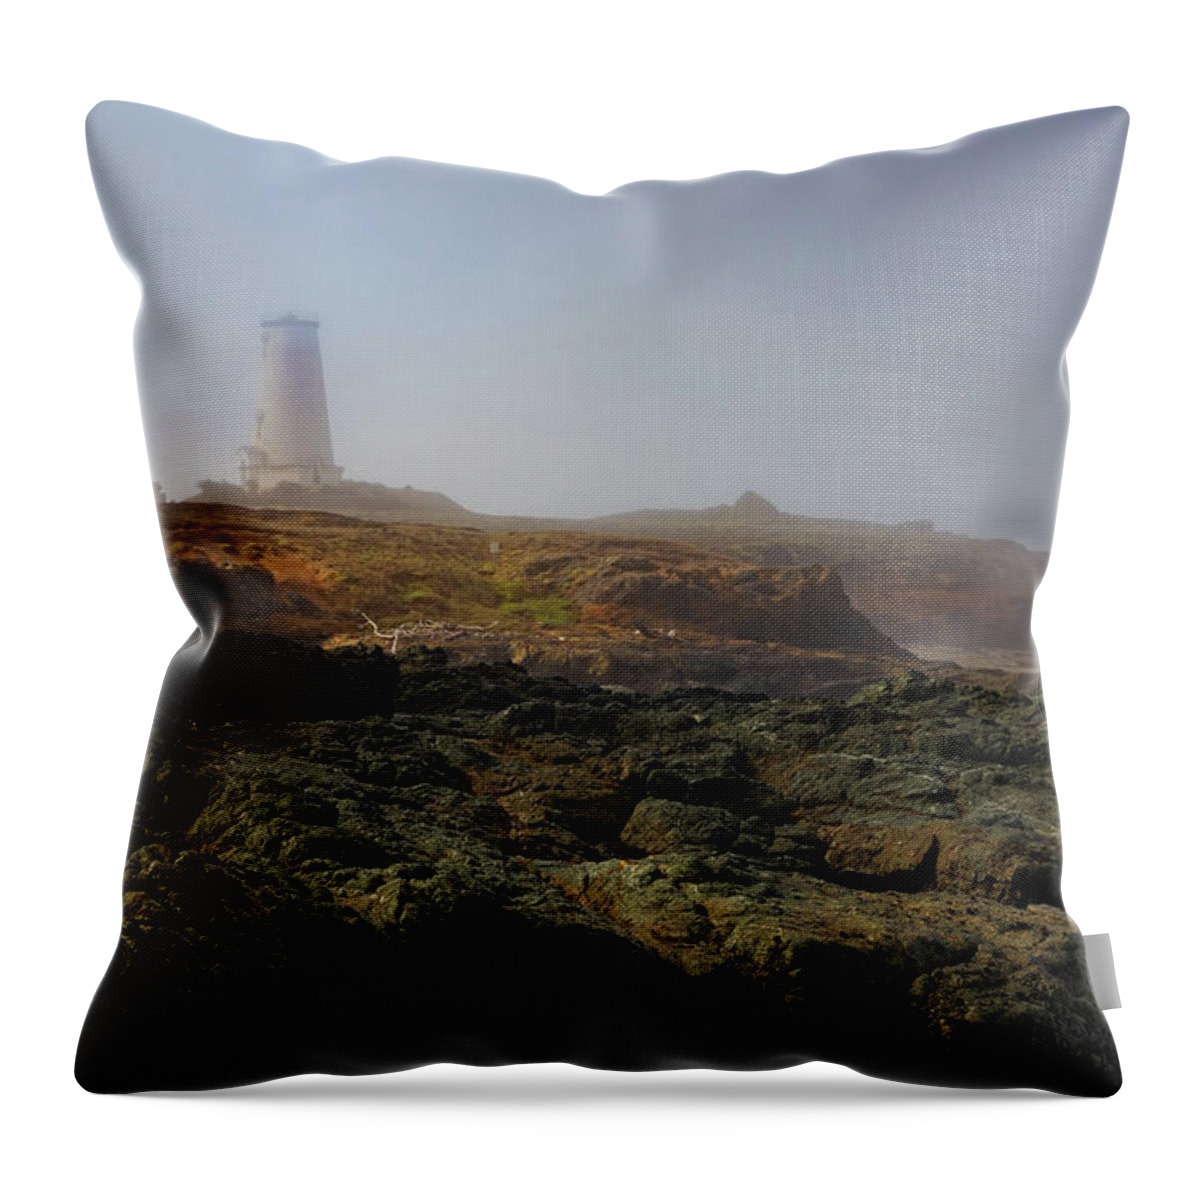 Piedras Blancas Throw Pillow featuring the photograph Piedras Blancas Lighthouse Peeking Out Of The Fog by Lars Mikkelsen